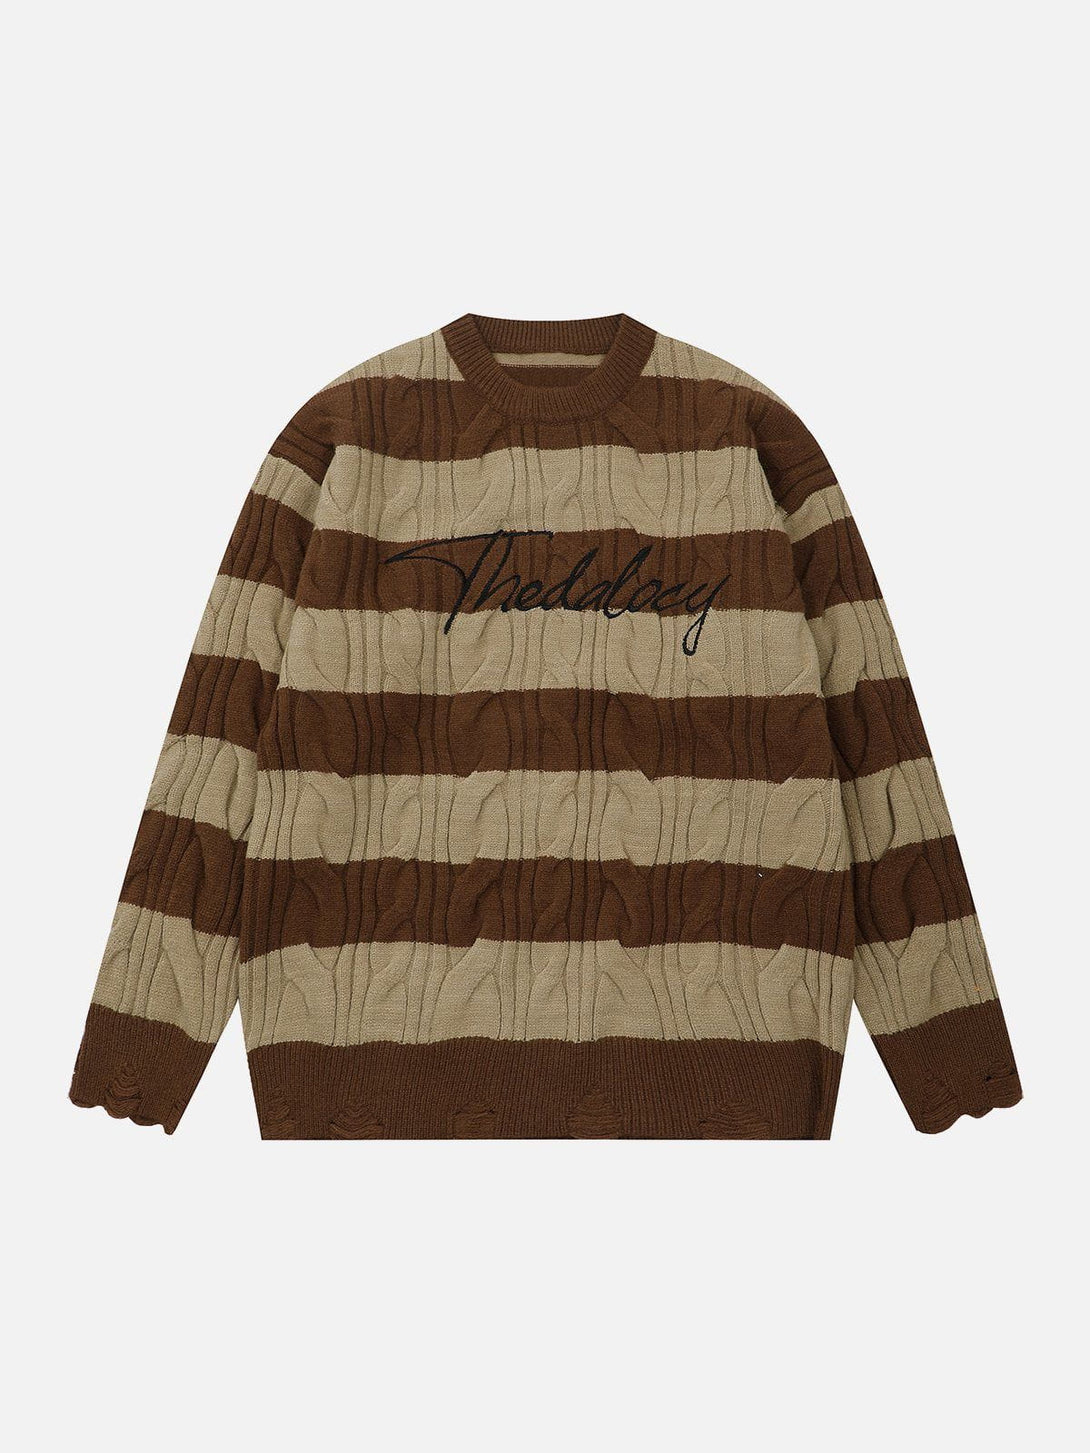 Majesda® - Striped Color Blocking Sweater outfit ideas streetwear fashion